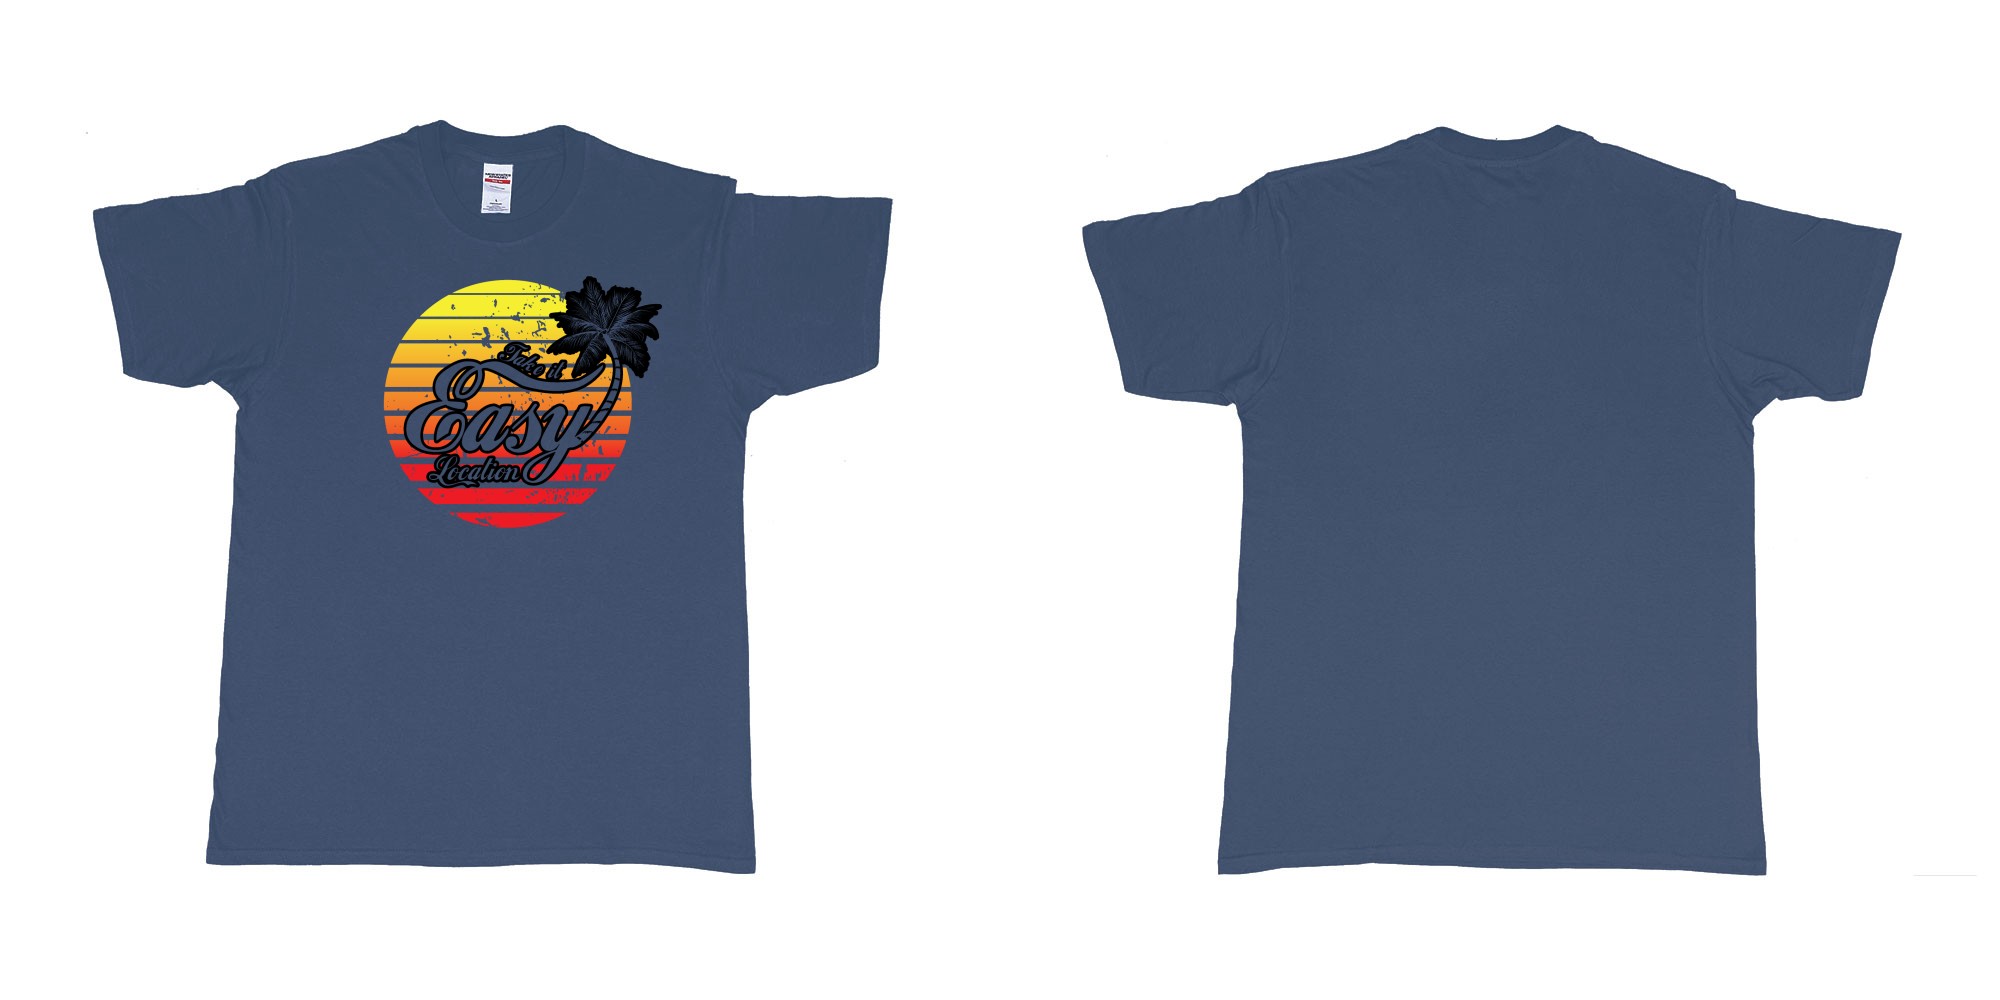 Custom tshirt design take is easy own location easy tee bali custom text printing in fabric color navy choice your own text made in Bali by The Pirate Way